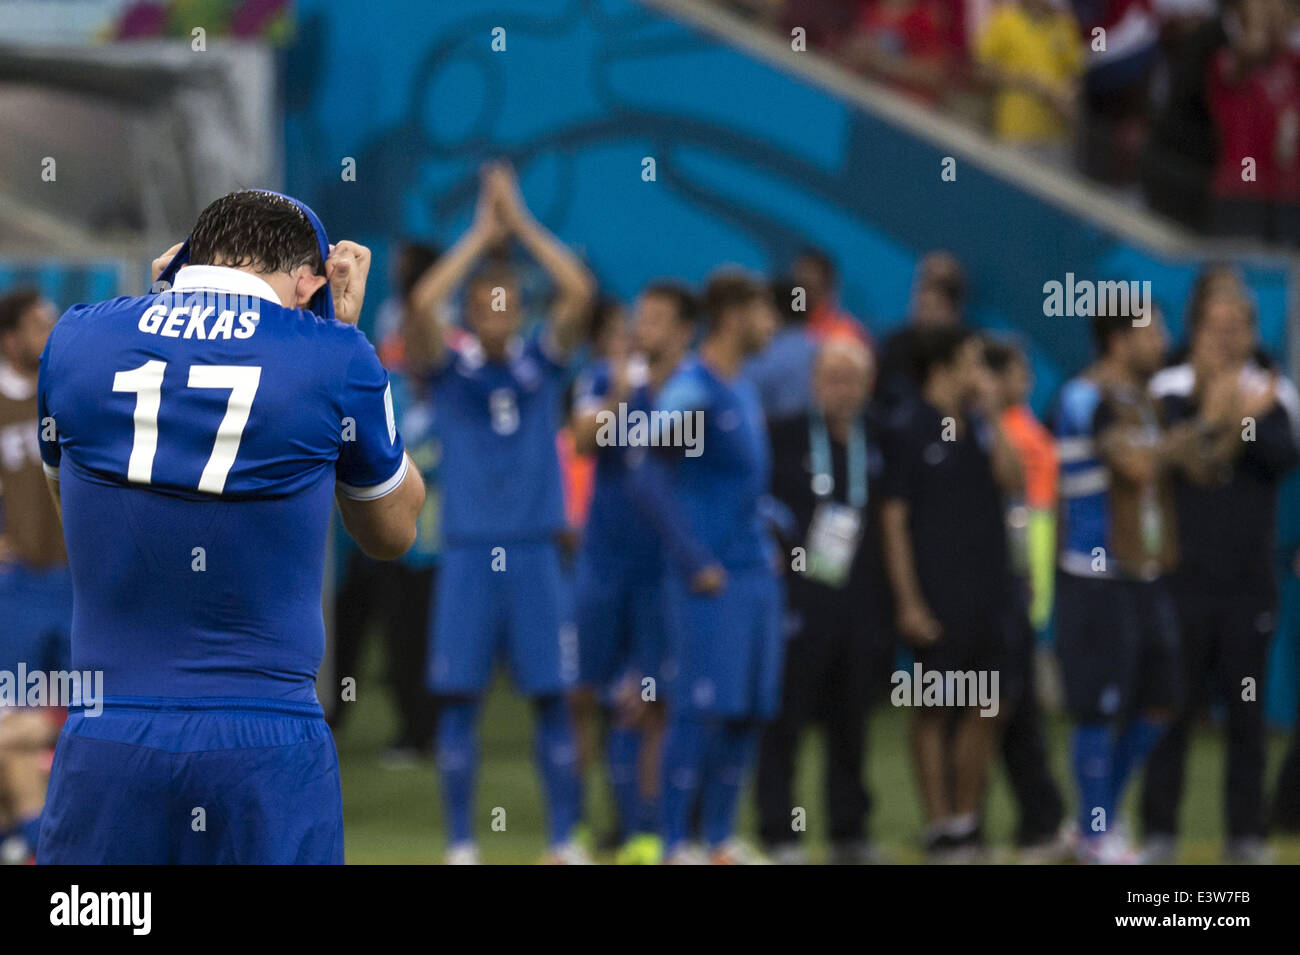 Recife, Brazil. 29th June, 2014. Theofanis Gekas (GRE) Football/Soccer : Theofanis Gekas of Greece looks dejected after missing in the penalty shoot-out during the FIFA World Cup Brazil 2014 Round of 16 match between Costa Rica 1(5-3)1 Greece at Arena Pernambuco in Recife, Brazil . Credit:  Maurizio Borsari/AFLO/Alamy Live News Stock Photo